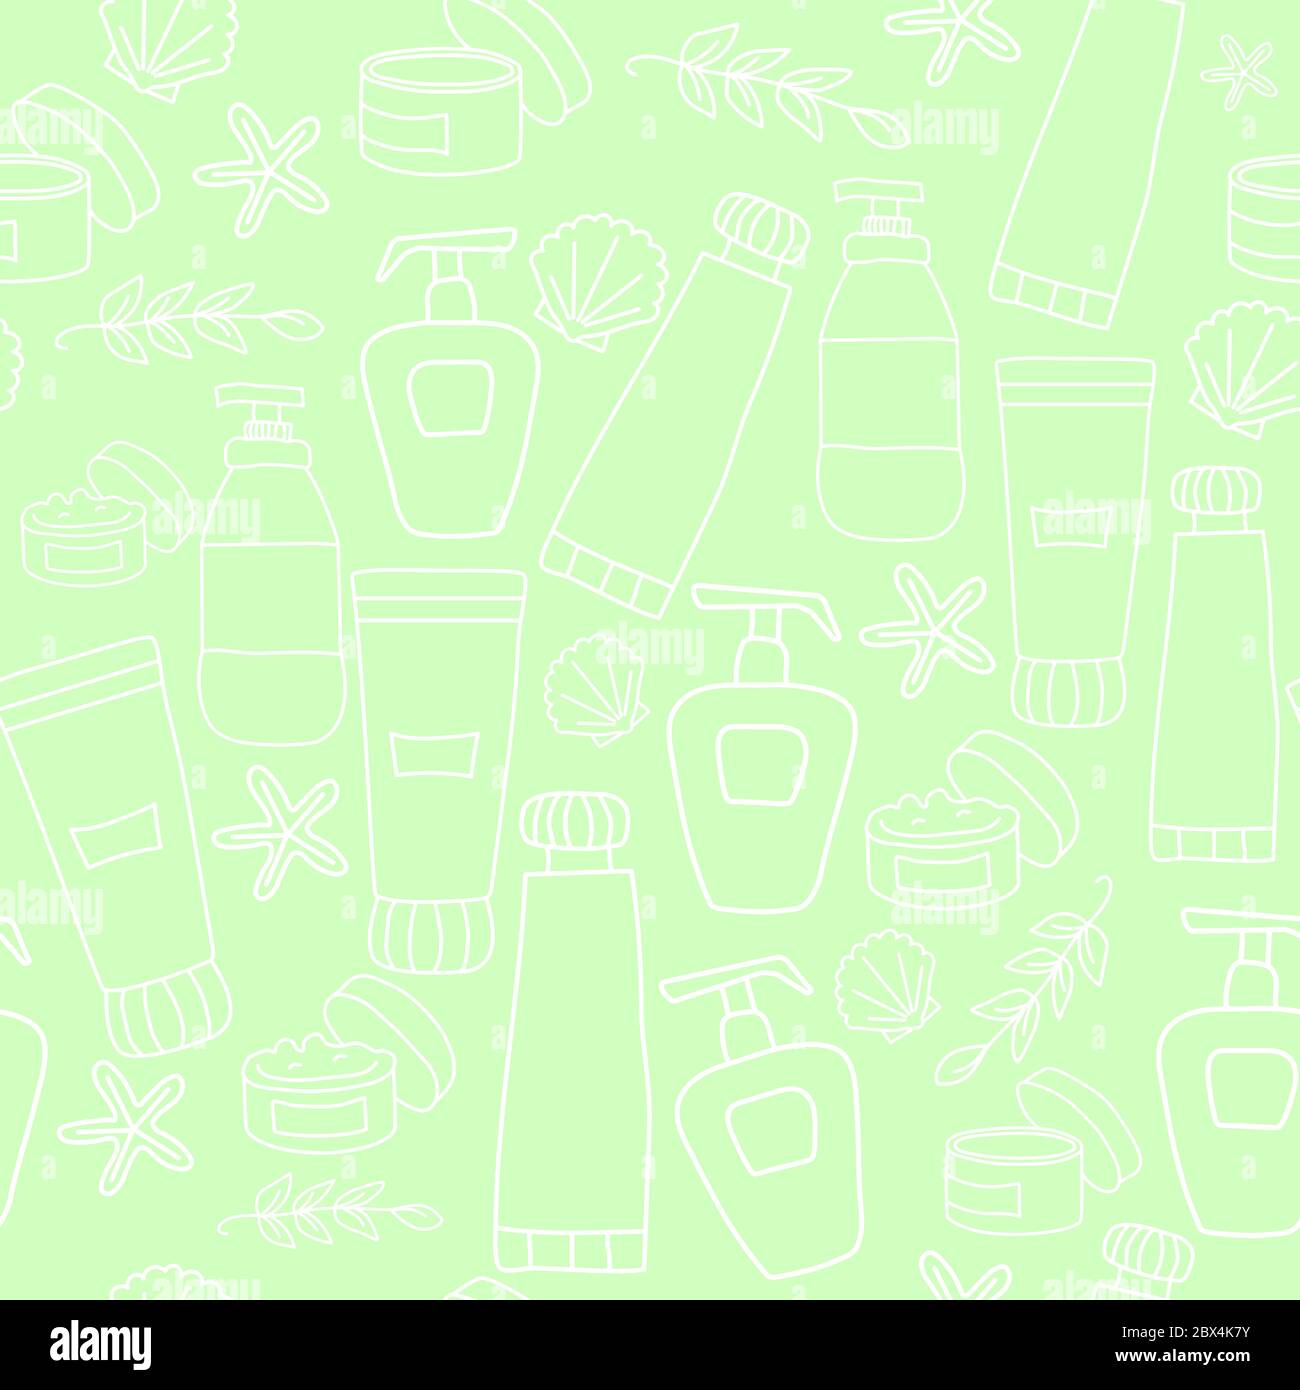 Seamless pattern of beauty and cosmetics icons. Creams and bottles, seashells. Vector outline illustration on a green gentle background. Stock Vector